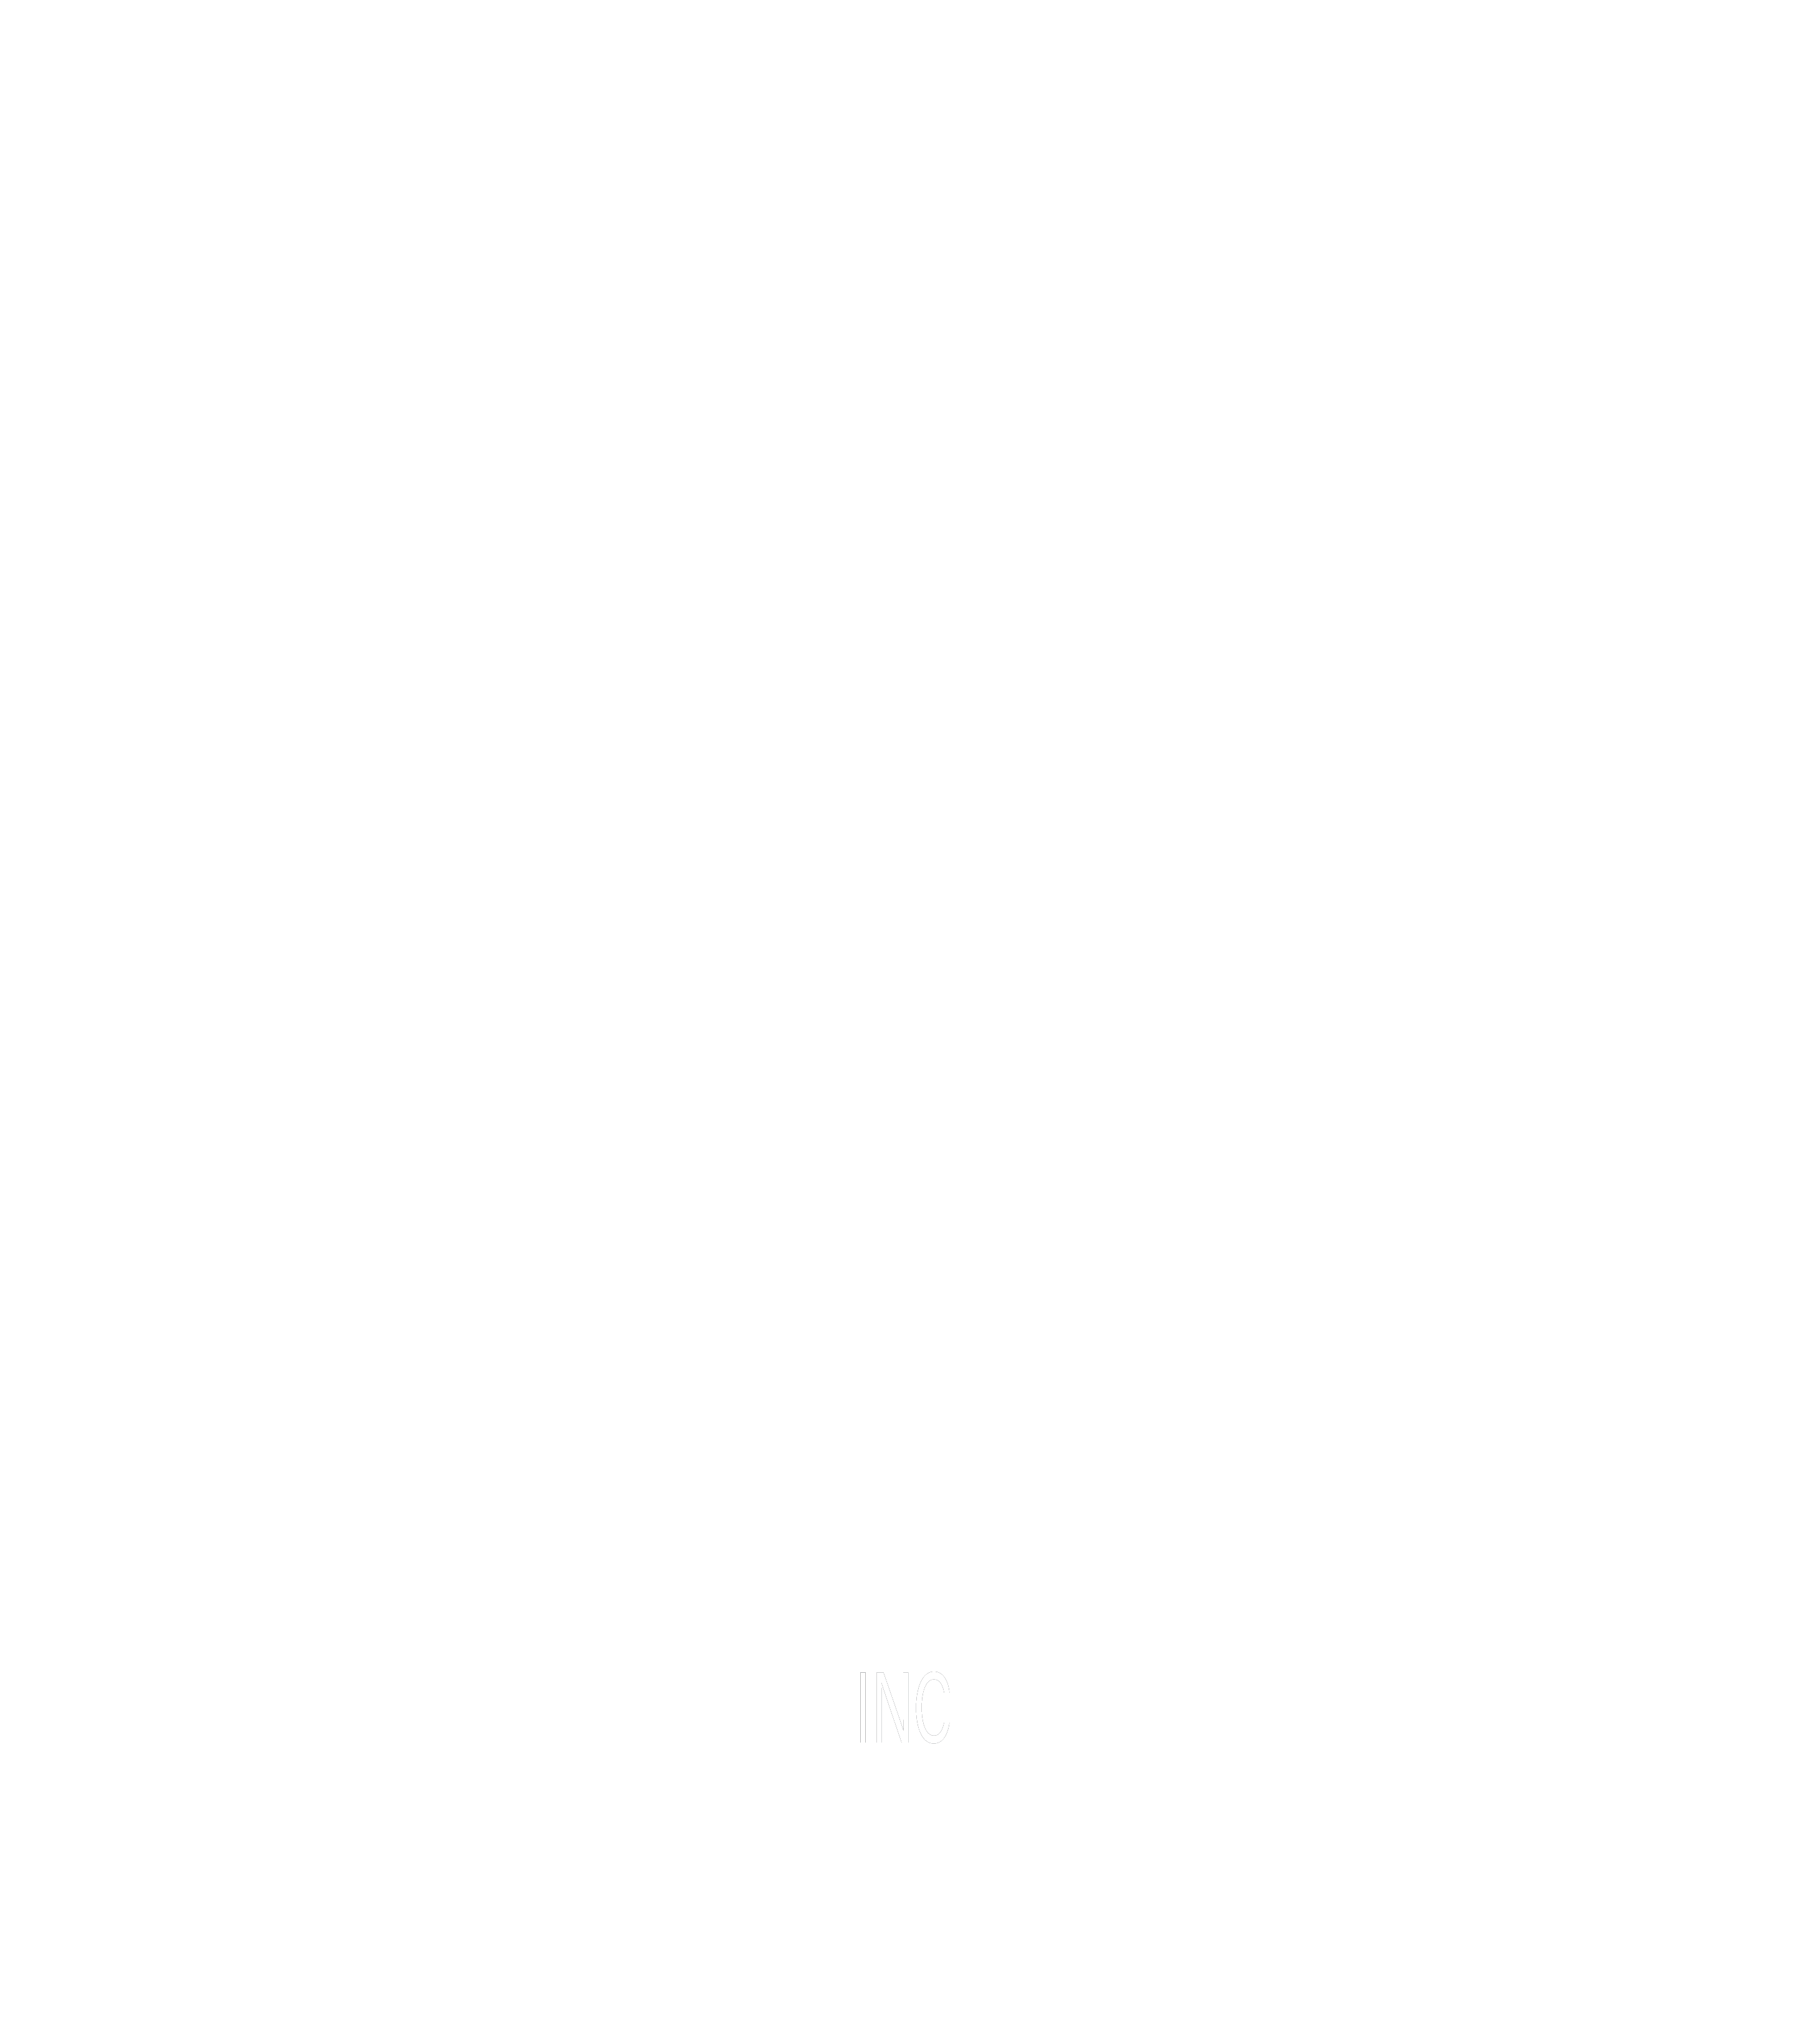 National Union of Students